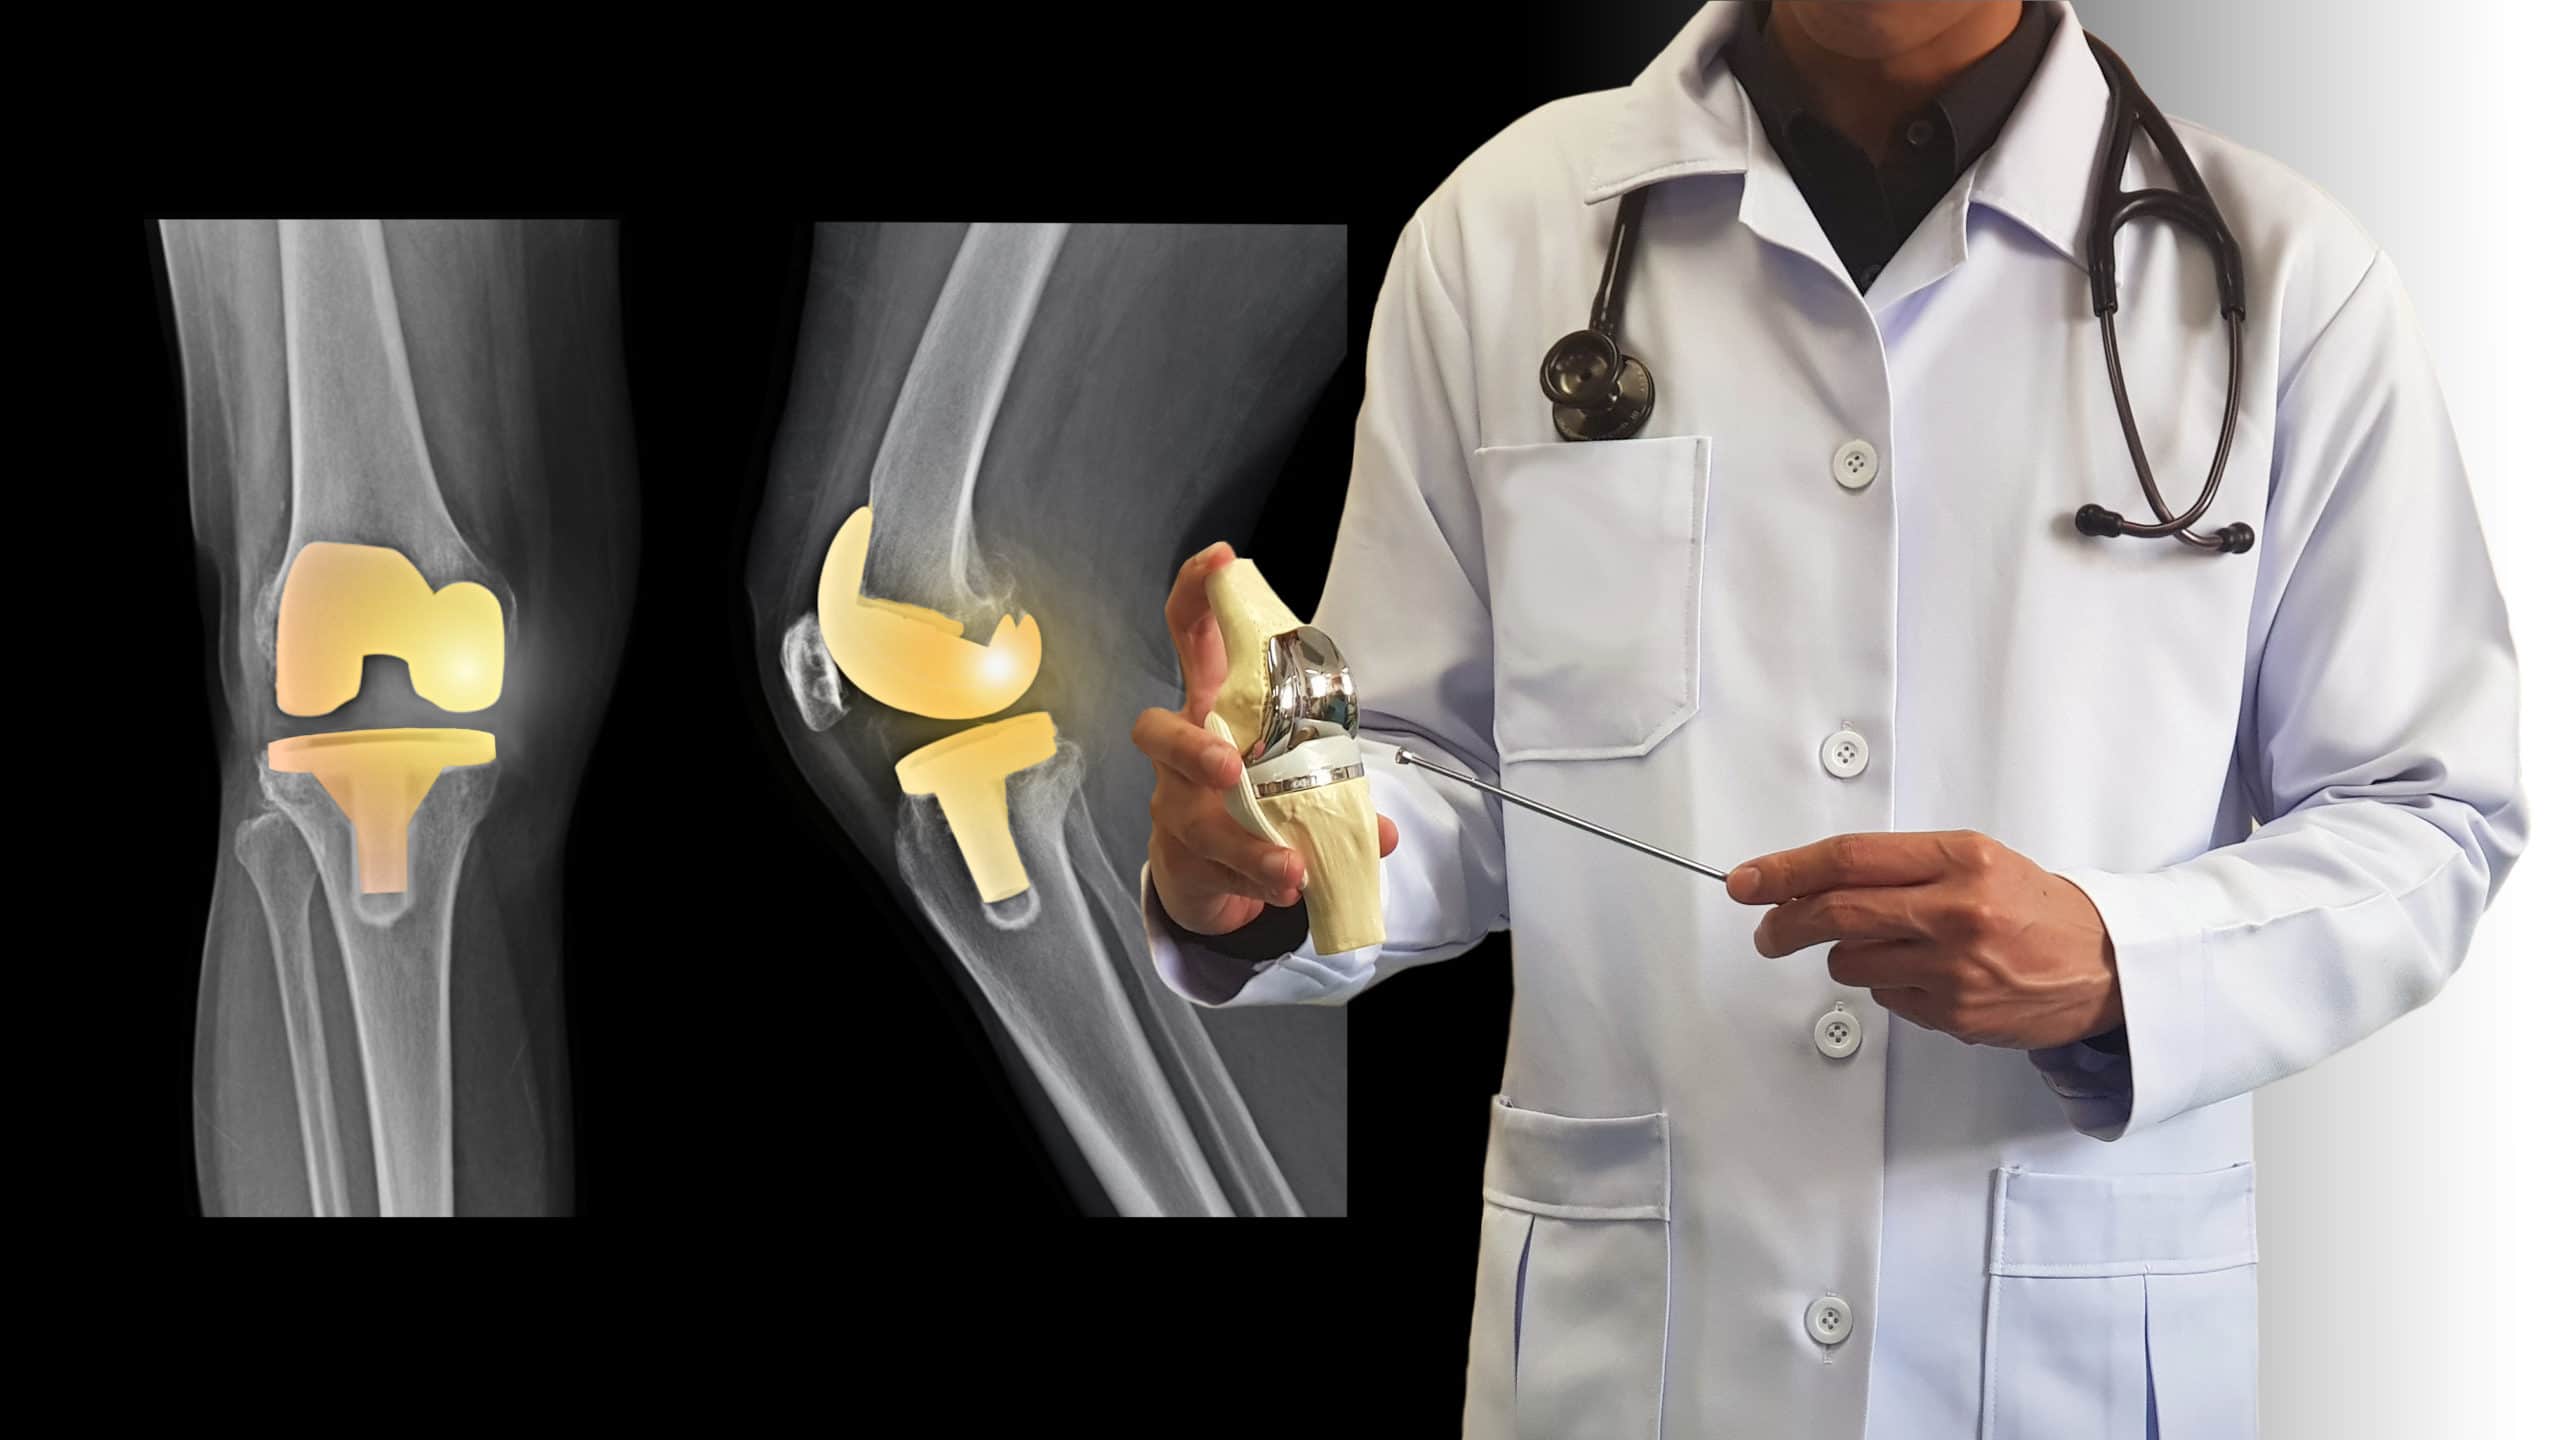 a surgeon holding a model of a knee showing arthroplasty, with an x-ray of knee replacement surgery.